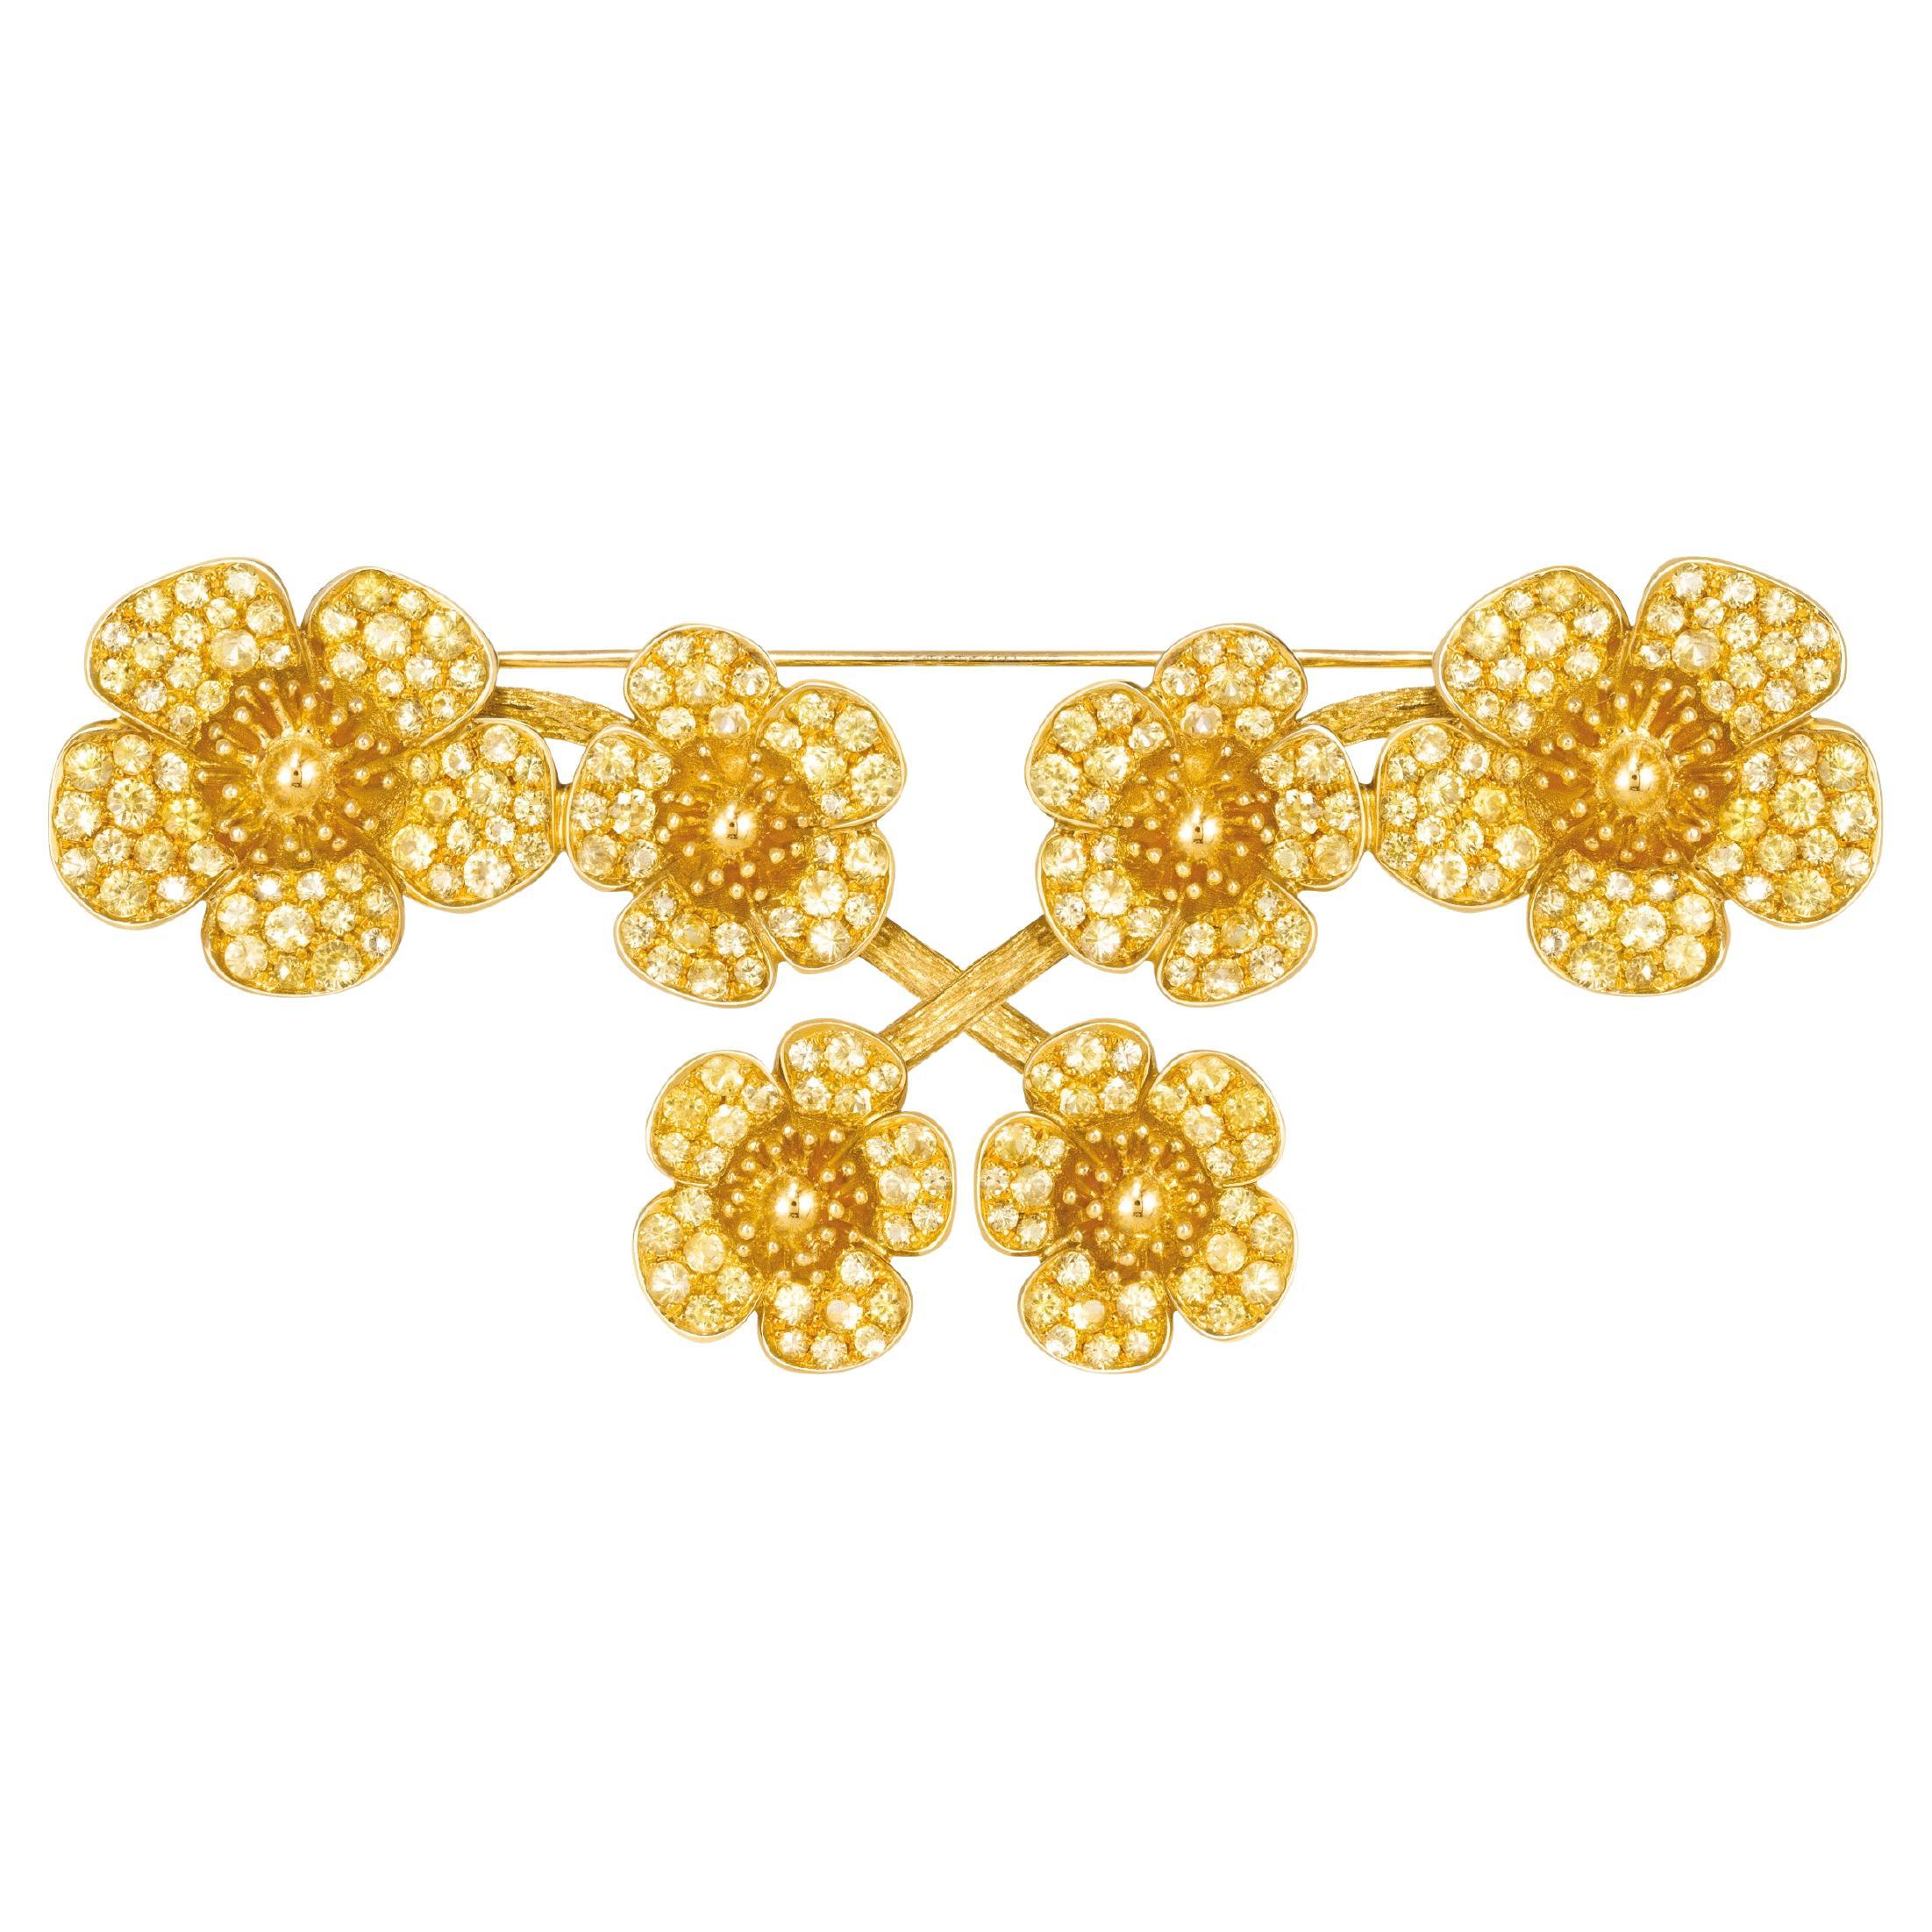 Transformable Brooch with Buttercup Flowers - 18k Gold, Yellow Sapphires